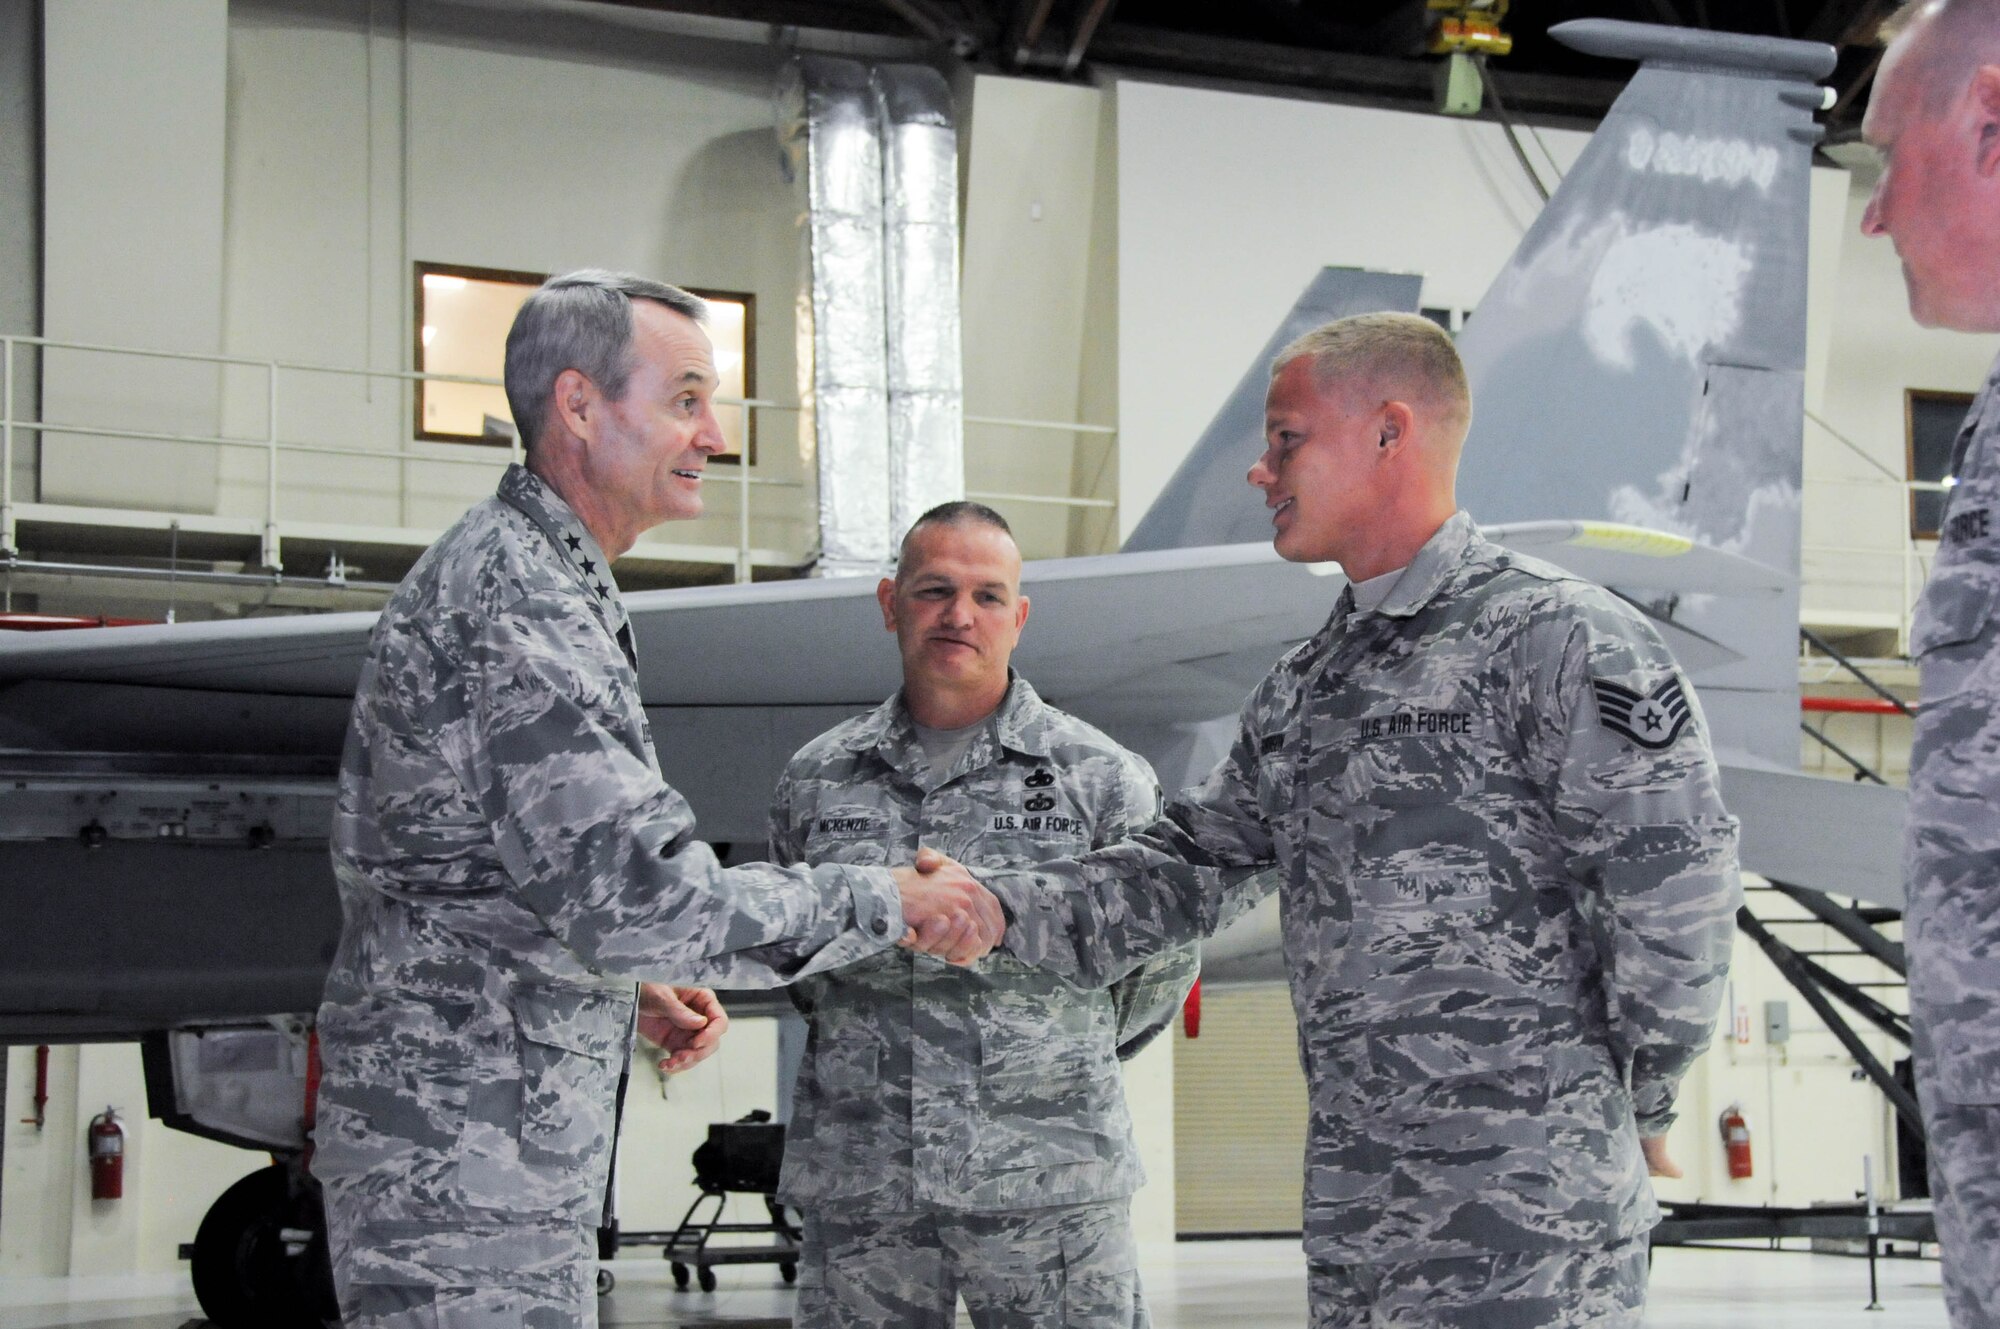 U.S. Air Force Lt. Gen. Darryl Roberson, commander of Air Education and Training Command, coins Staff Sgt. Christopher Robinson, 173rd Maintenance Group, July 7, 2016,in recognition of his superior performance at Kingsley Field, Ore. Roberson had a firsthand look at the unit's mission and capabilities, which includes training F-15C Eagle fighter pilots. The 173rd FW is aligned under AETC. (U.S. Air National Guard photo by Staff Sgt. Penny Snoozy)
